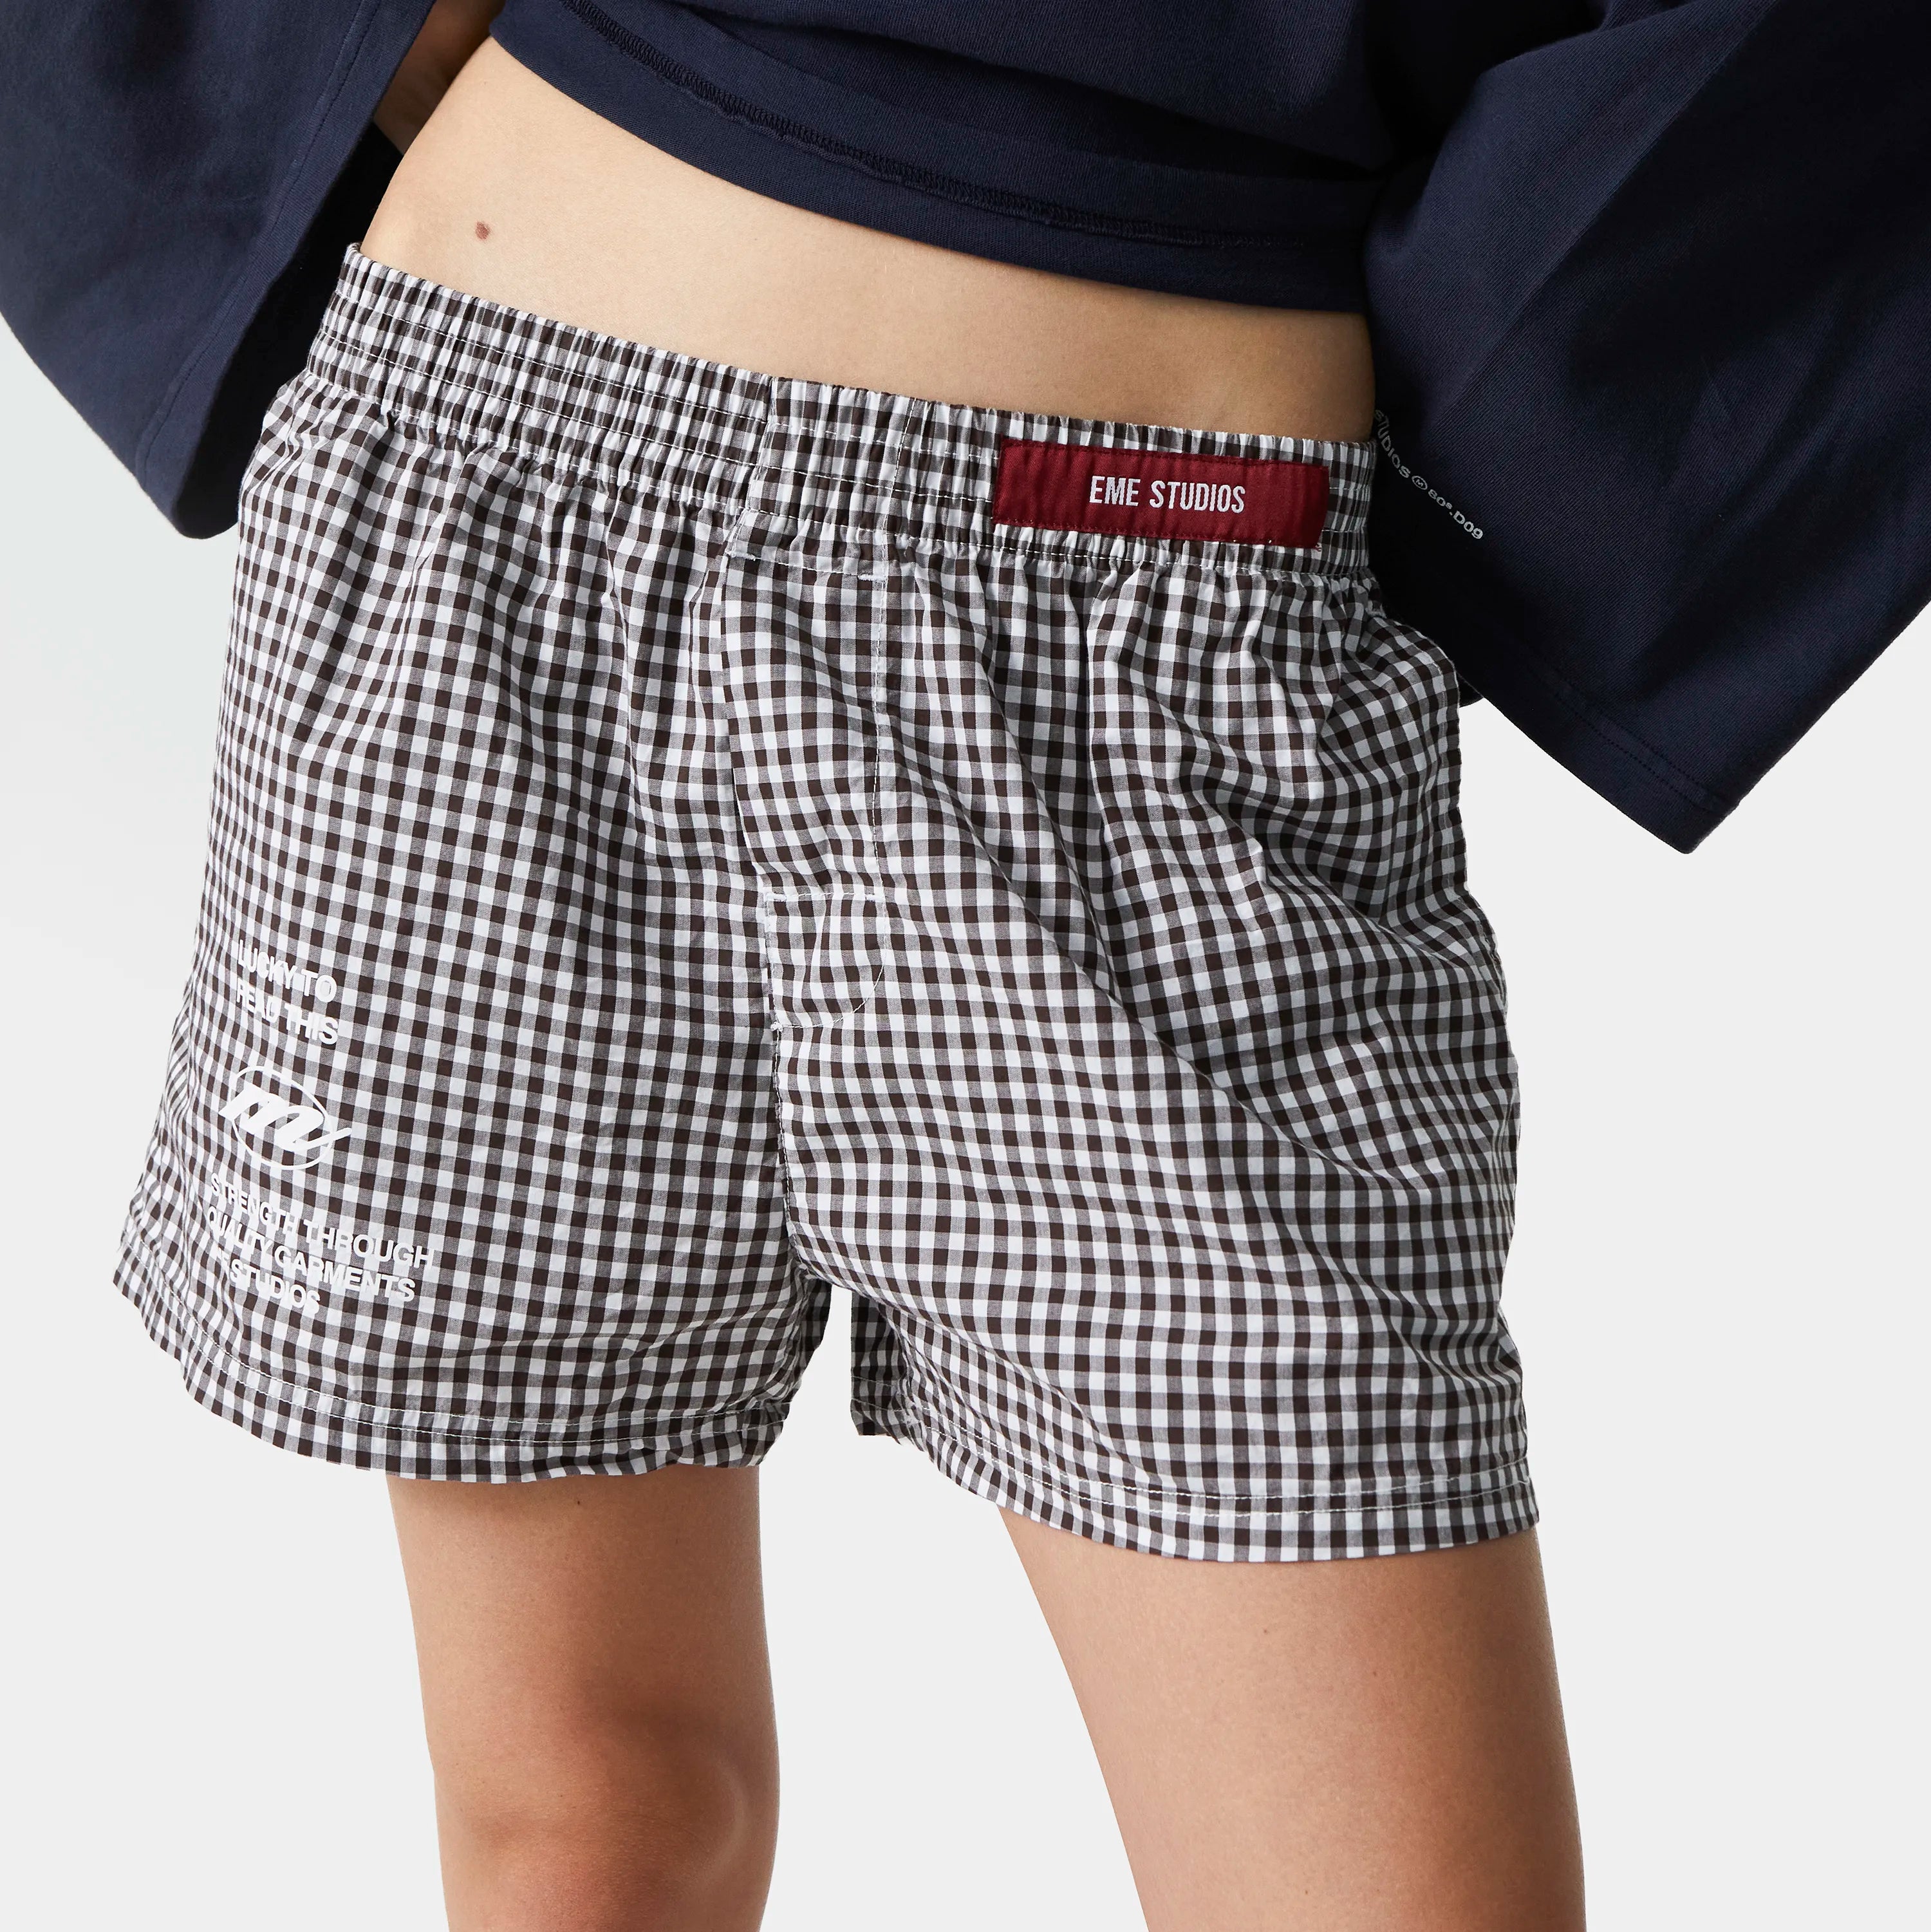 Lucky Squared Boxers Underwear eme   